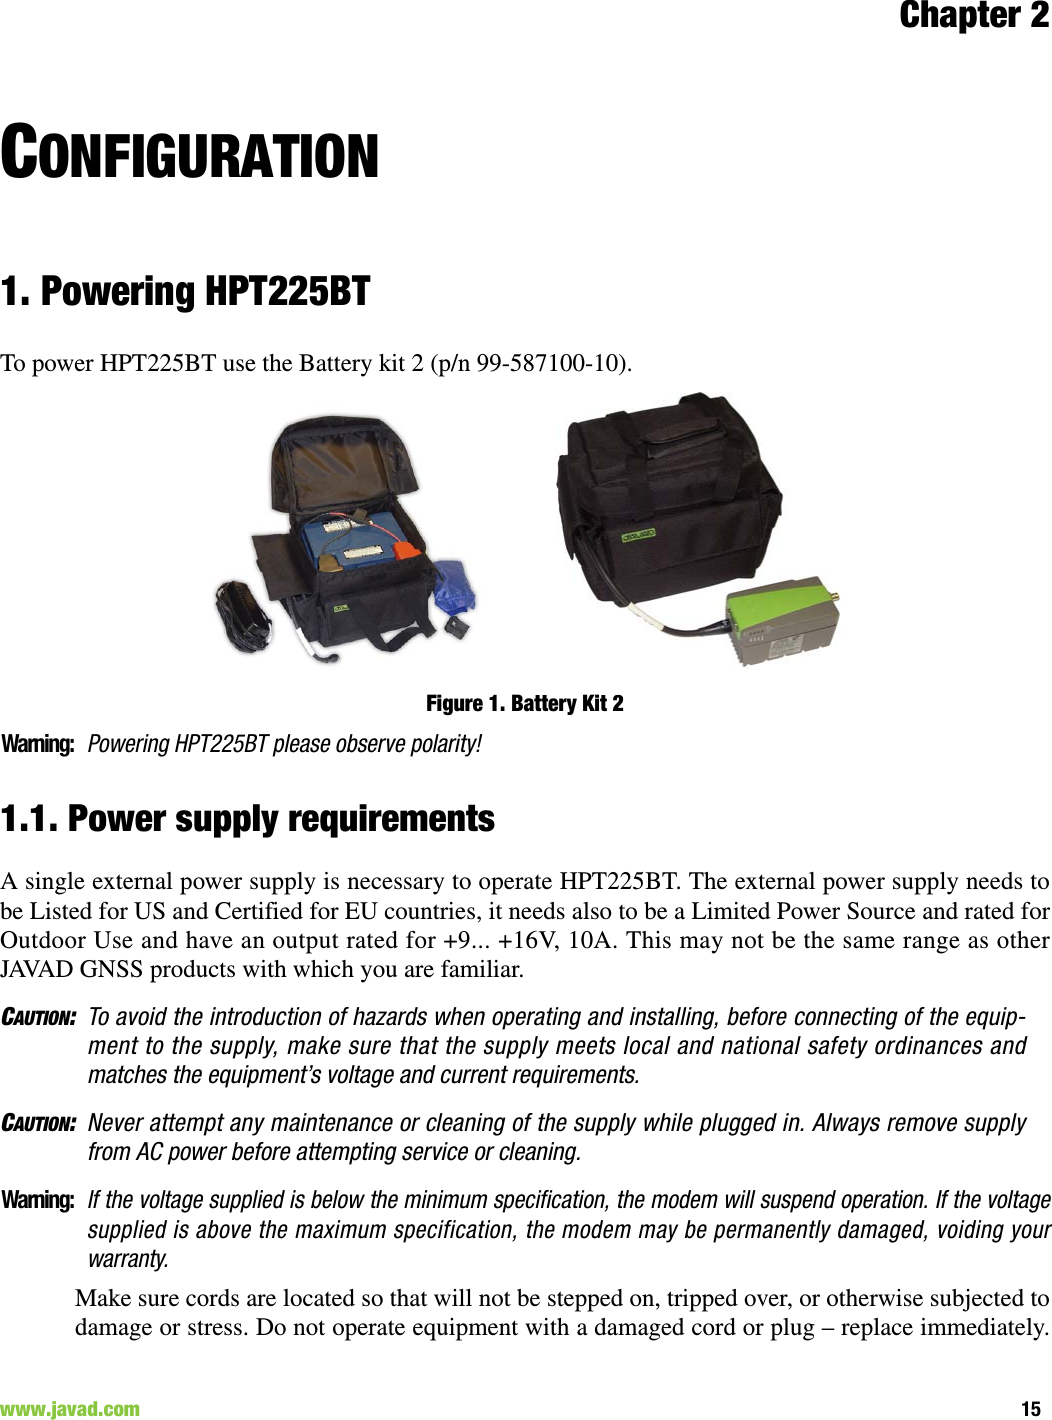 Chapter 215www.javad.com                                                                                                                                                        CONFIGURATION1. Powering HPT225BTTo power HPT225BT use the Battery kit 2 (p/n 99-587100-10).Figure 1. Battery Kit 2Warning:Powering HPT225BT please observe polarity! 1.1. Power supply requirementsA single external power supply is necessary to operate HPT225BT. The external power supply needs tobe Listed for US and Certified for EU countries, it needs also to be a Limited Power Source and rated forOutdoor Use and have an output rated for +9... +16V, 10A. This may not be the same range as otherJAVAD GNSS products with which you are familiar.CAUTION:To avoid the introduction of hazards when operating and installing, before connecting of the equip-ment to the supply, make sure that the supply meets local and national safety ordinances andmatches the equipment’s voltage and current requirements.CAUTION:Never attempt any maintenance or cleaning of the supply while plugged in. Always remove supplyfrom AC power before attempting service or cleaning.Warning:If the voltage supplied is below the minimum specification, the modem will suspend operation. If the voltagesupplied is above the maximum specification, the modem may be permanently damaged, voiding yourwarranty.Make sure cords are located so that will not be stepped on, tripped over, or otherwise subjected todamage or stress. Do not operate equipment with a damaged cord or plug – replace immediately.